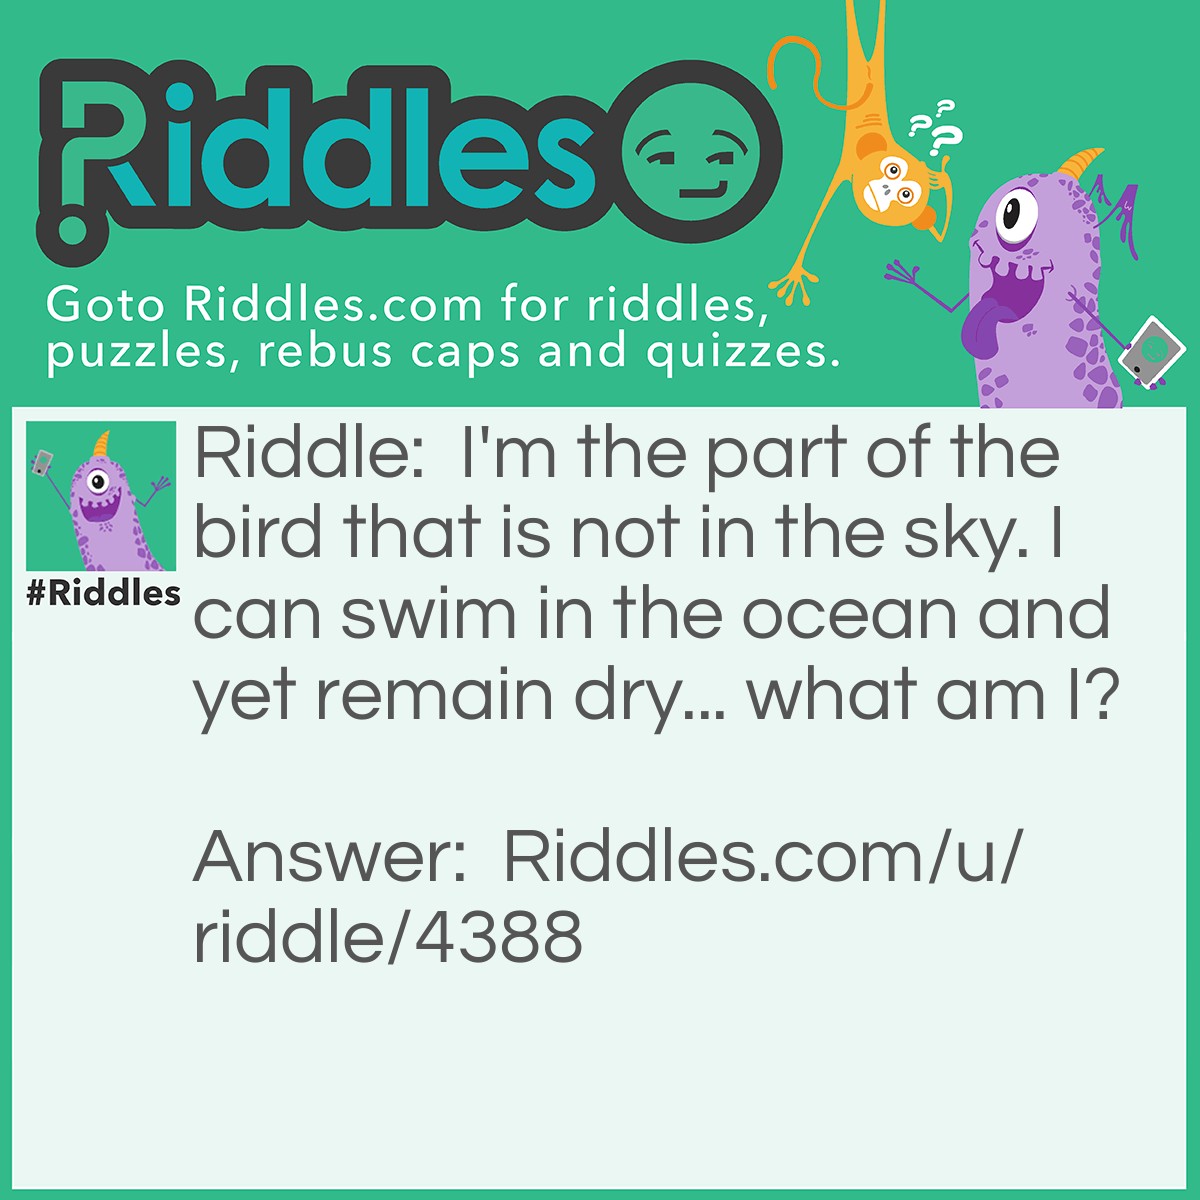 Riddle: I'm the part of the bird that is not in the sky. I can swim in the ocean and yet remain dry... what am I? Answer: A shadow.